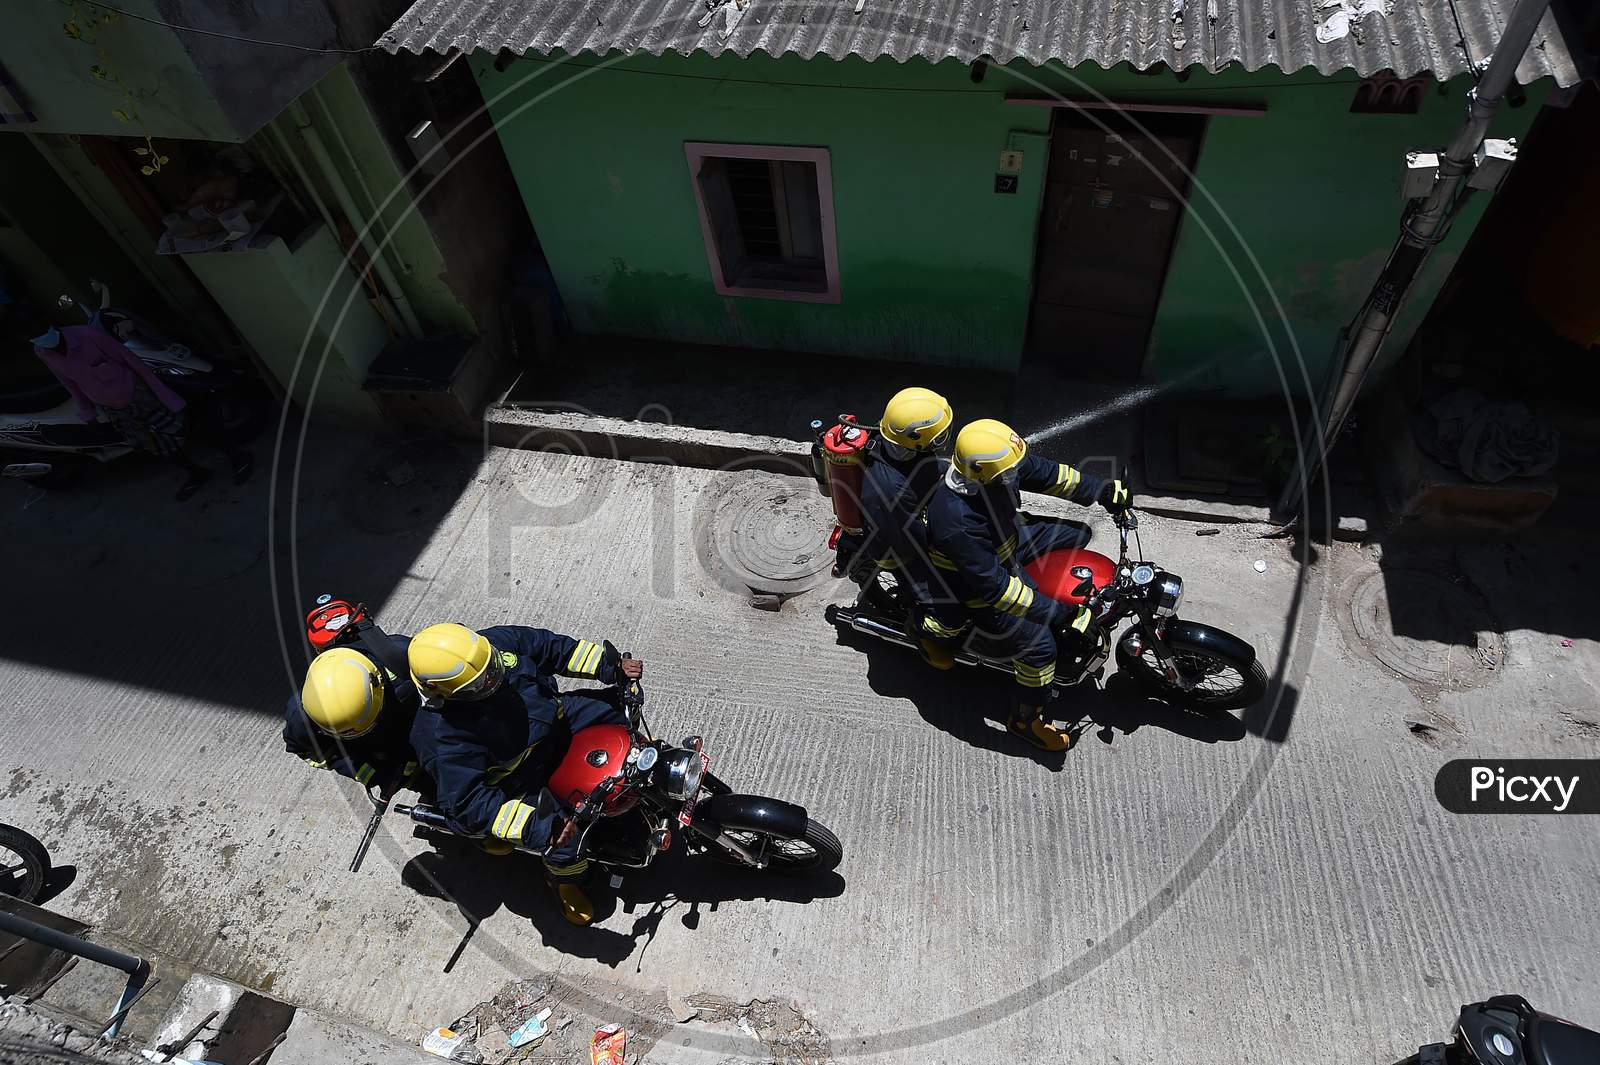 Firefighters on motorbikes spray disinfectants in a containment zone during the lockdown in Chennai on July 04, 2020